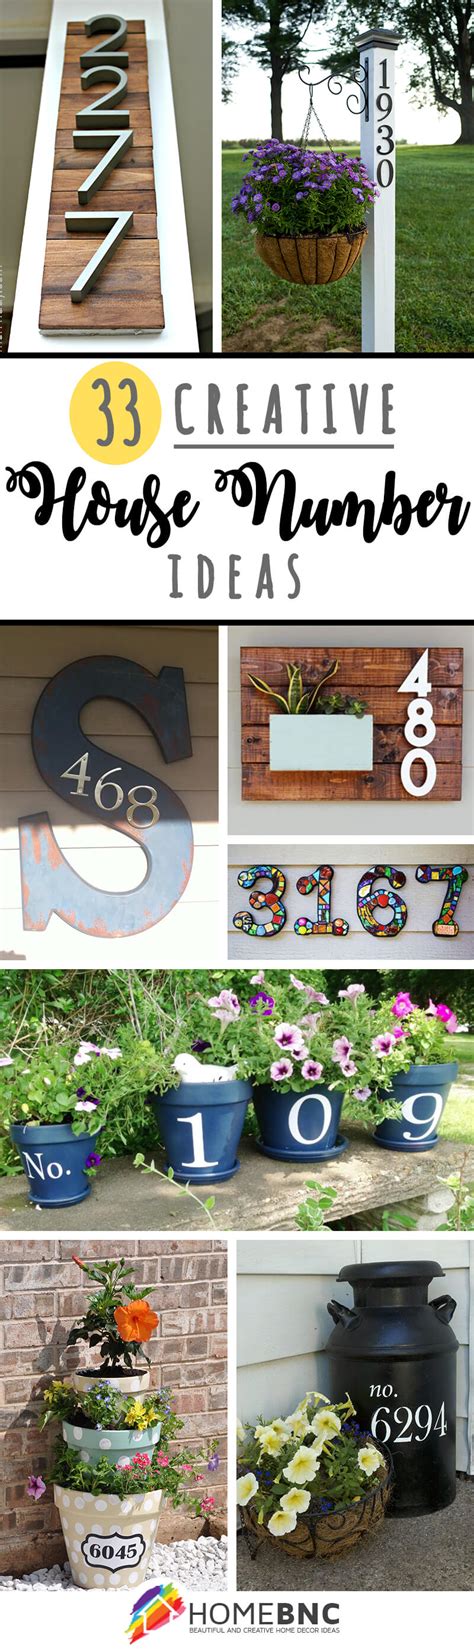 33 Best Creative House Number Ideas And Designs For 2020